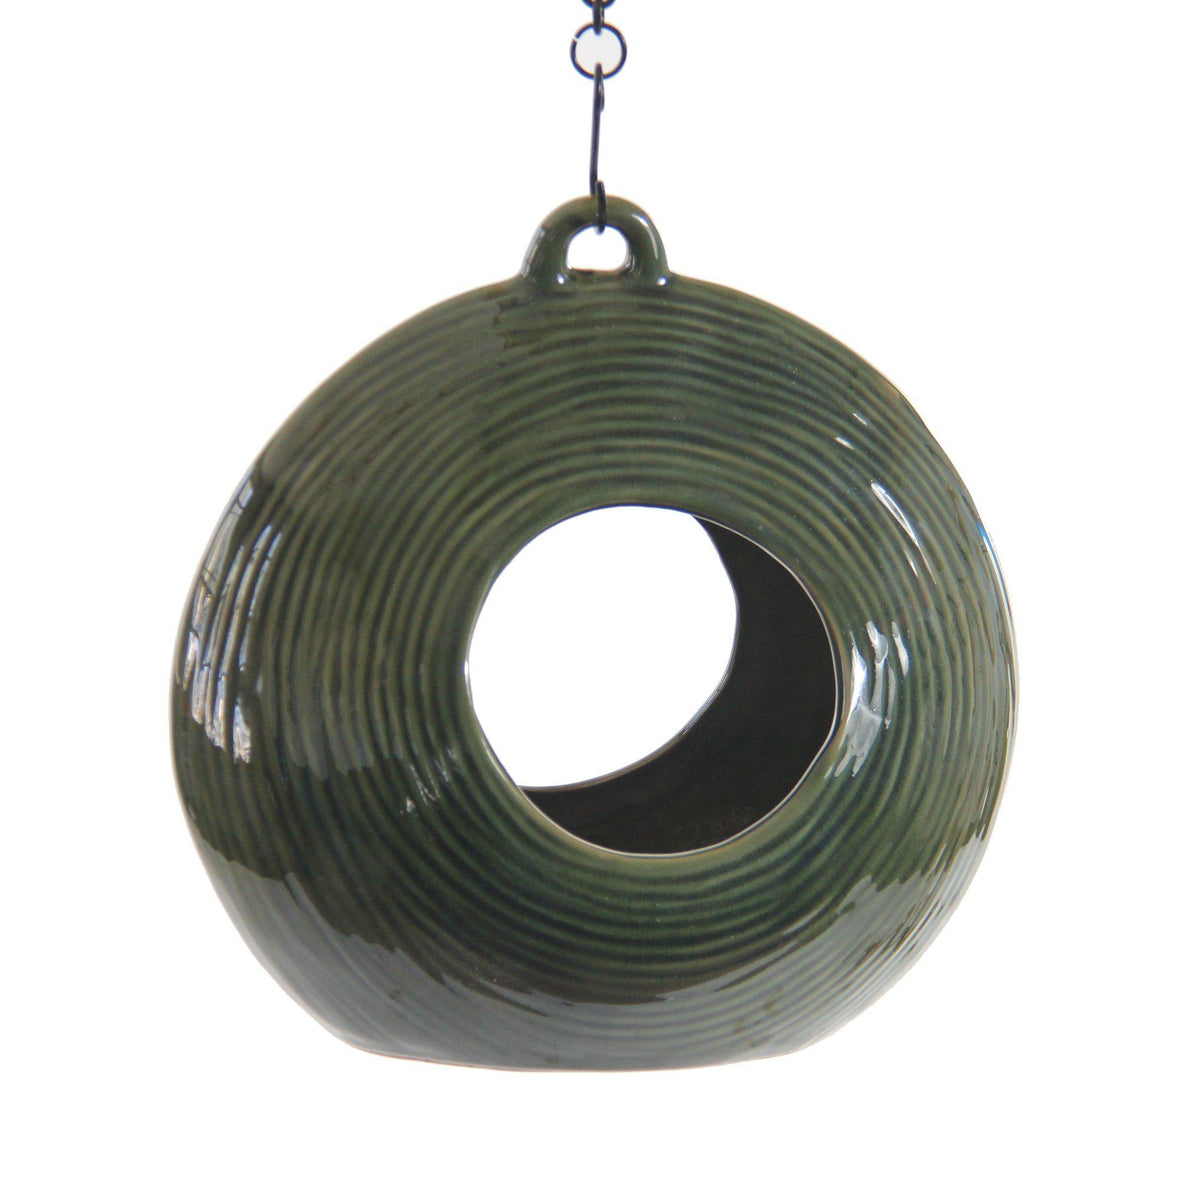 Circles Fly-Through Feeder, Heather Green, from Byer of Maine